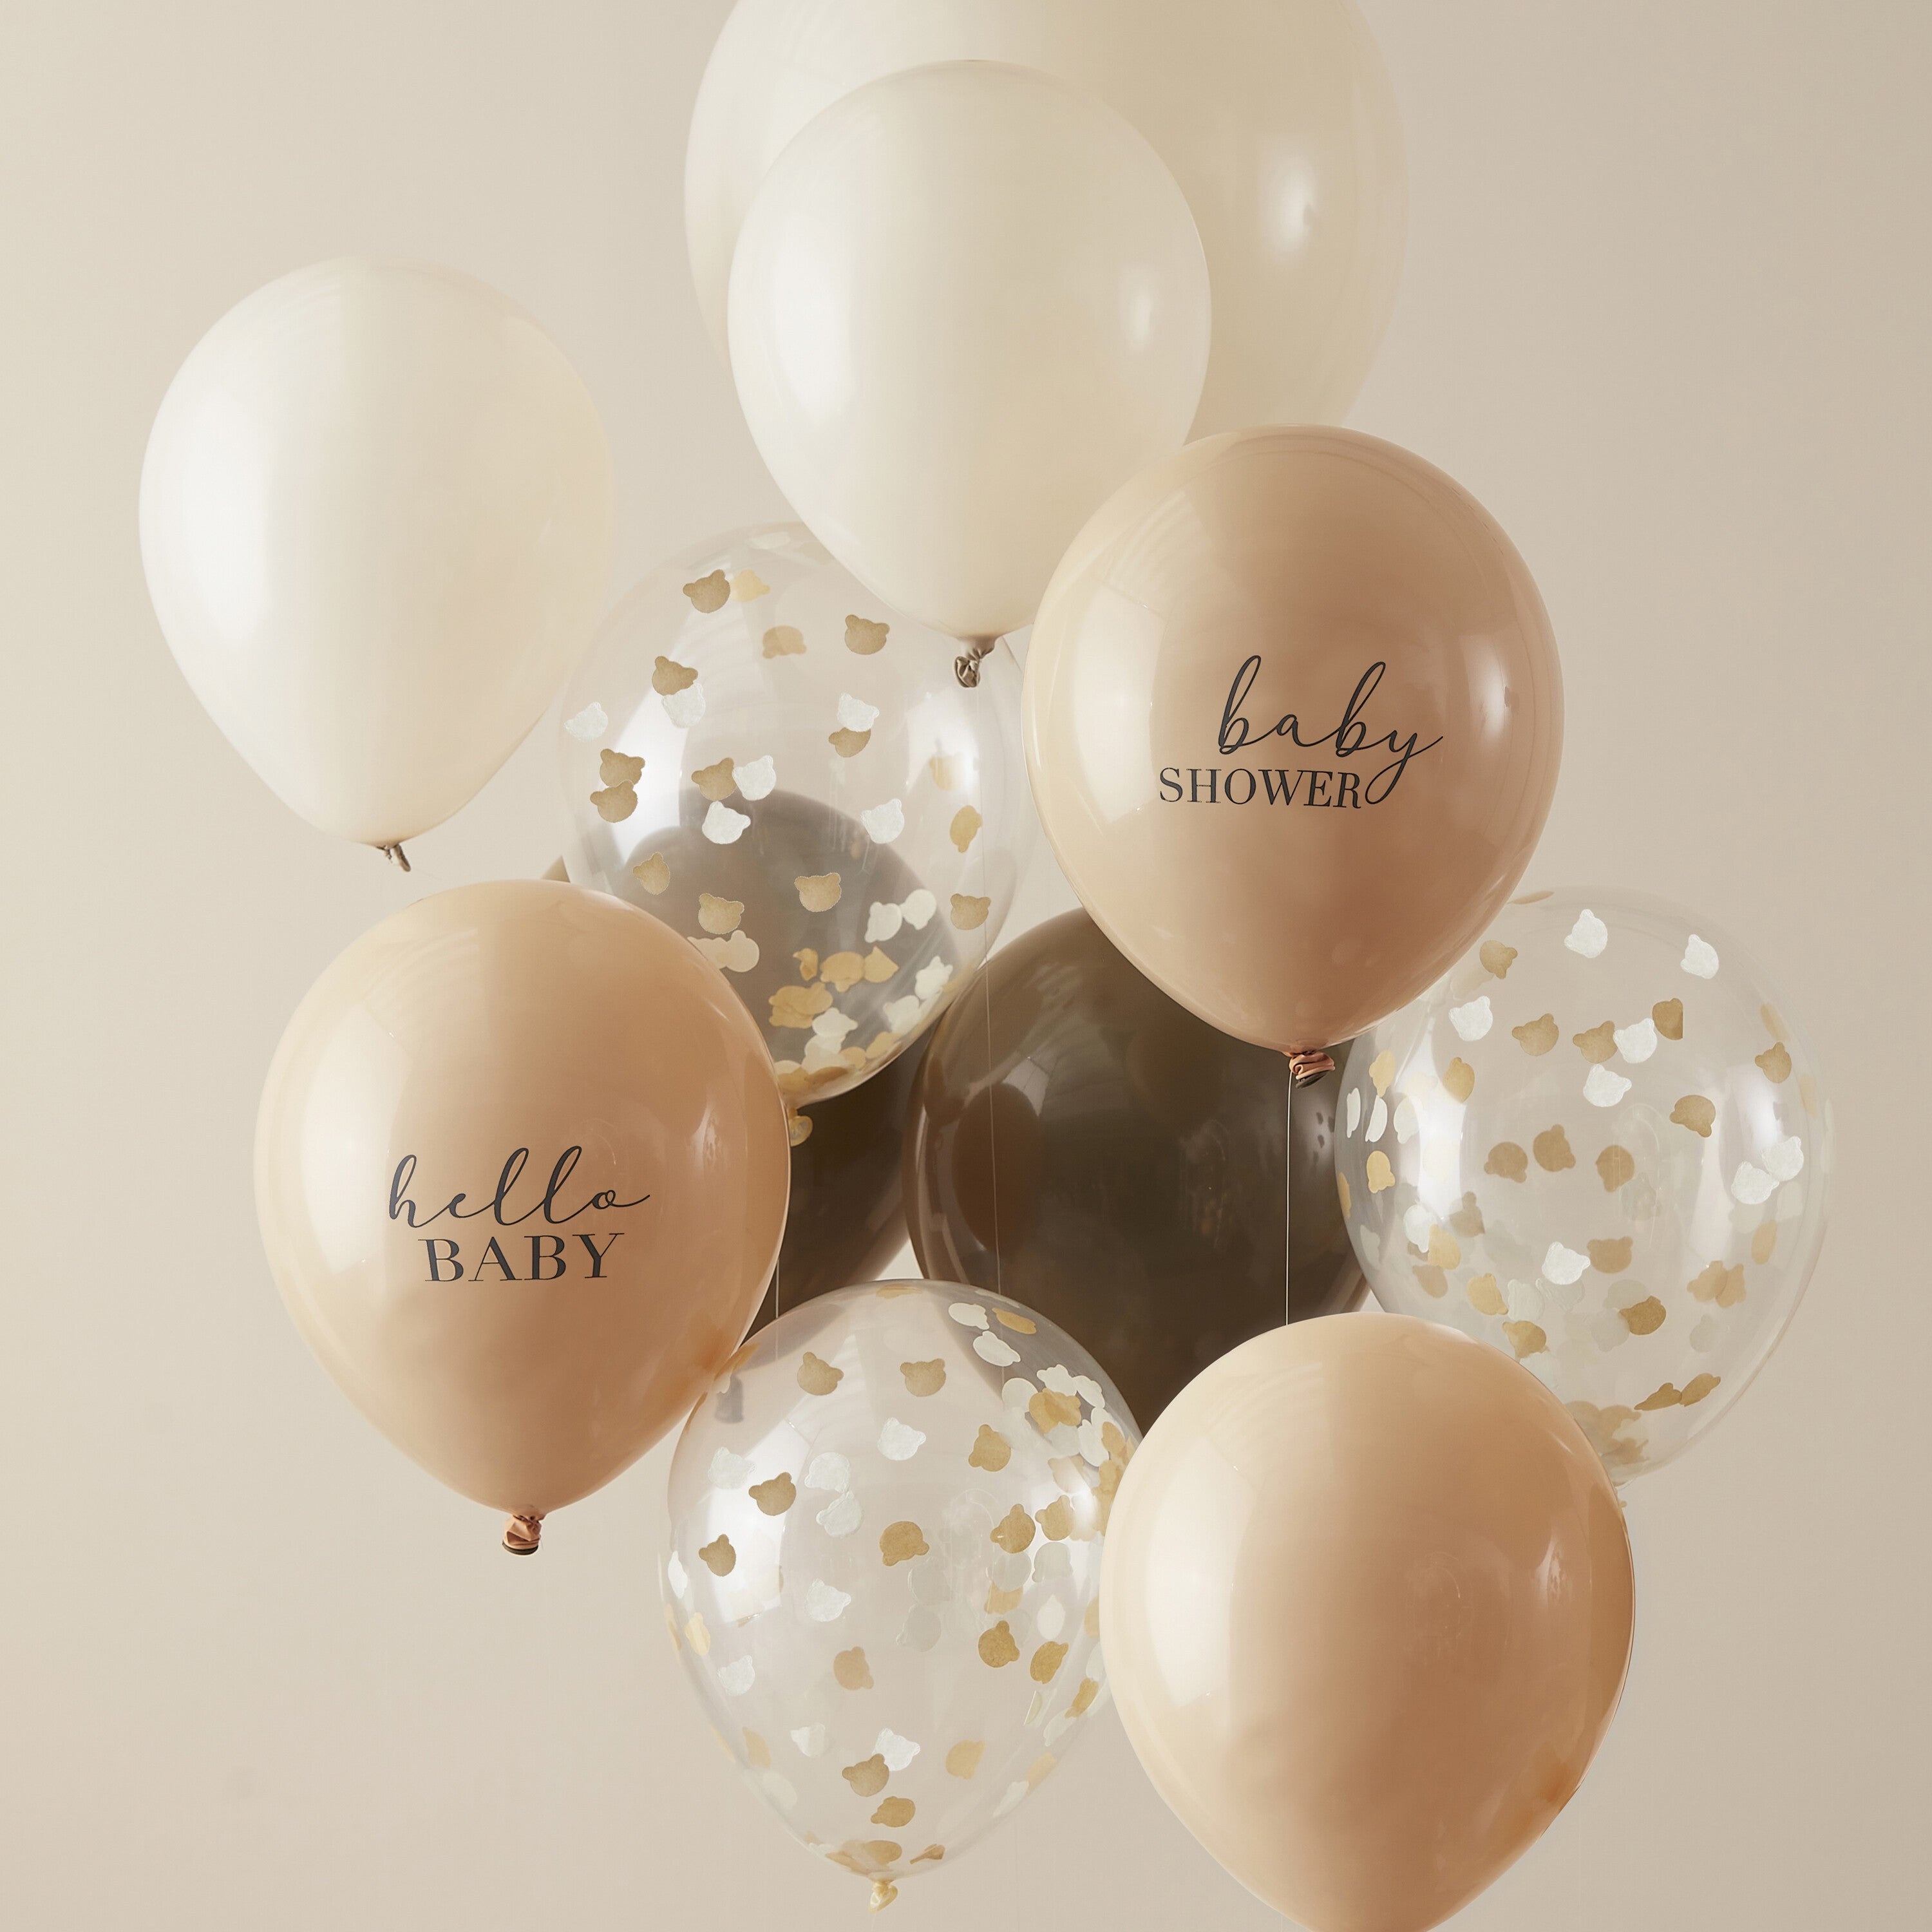 11 Neutral Baby Shower Balloons Baby Shower Decorations photo image